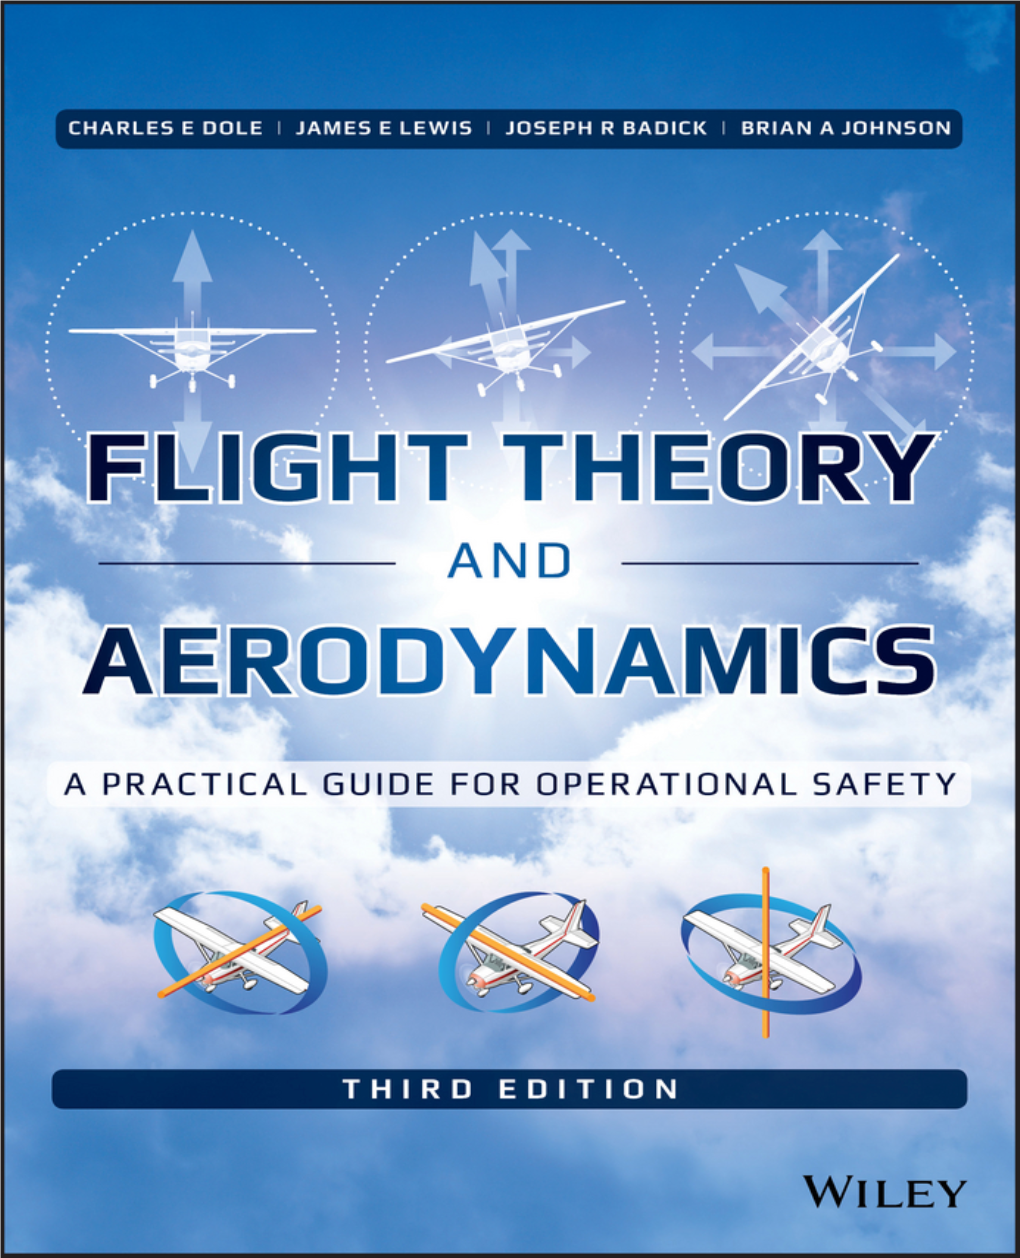 Flight Theory and Aerodynamics: a Practical Guide for Operational